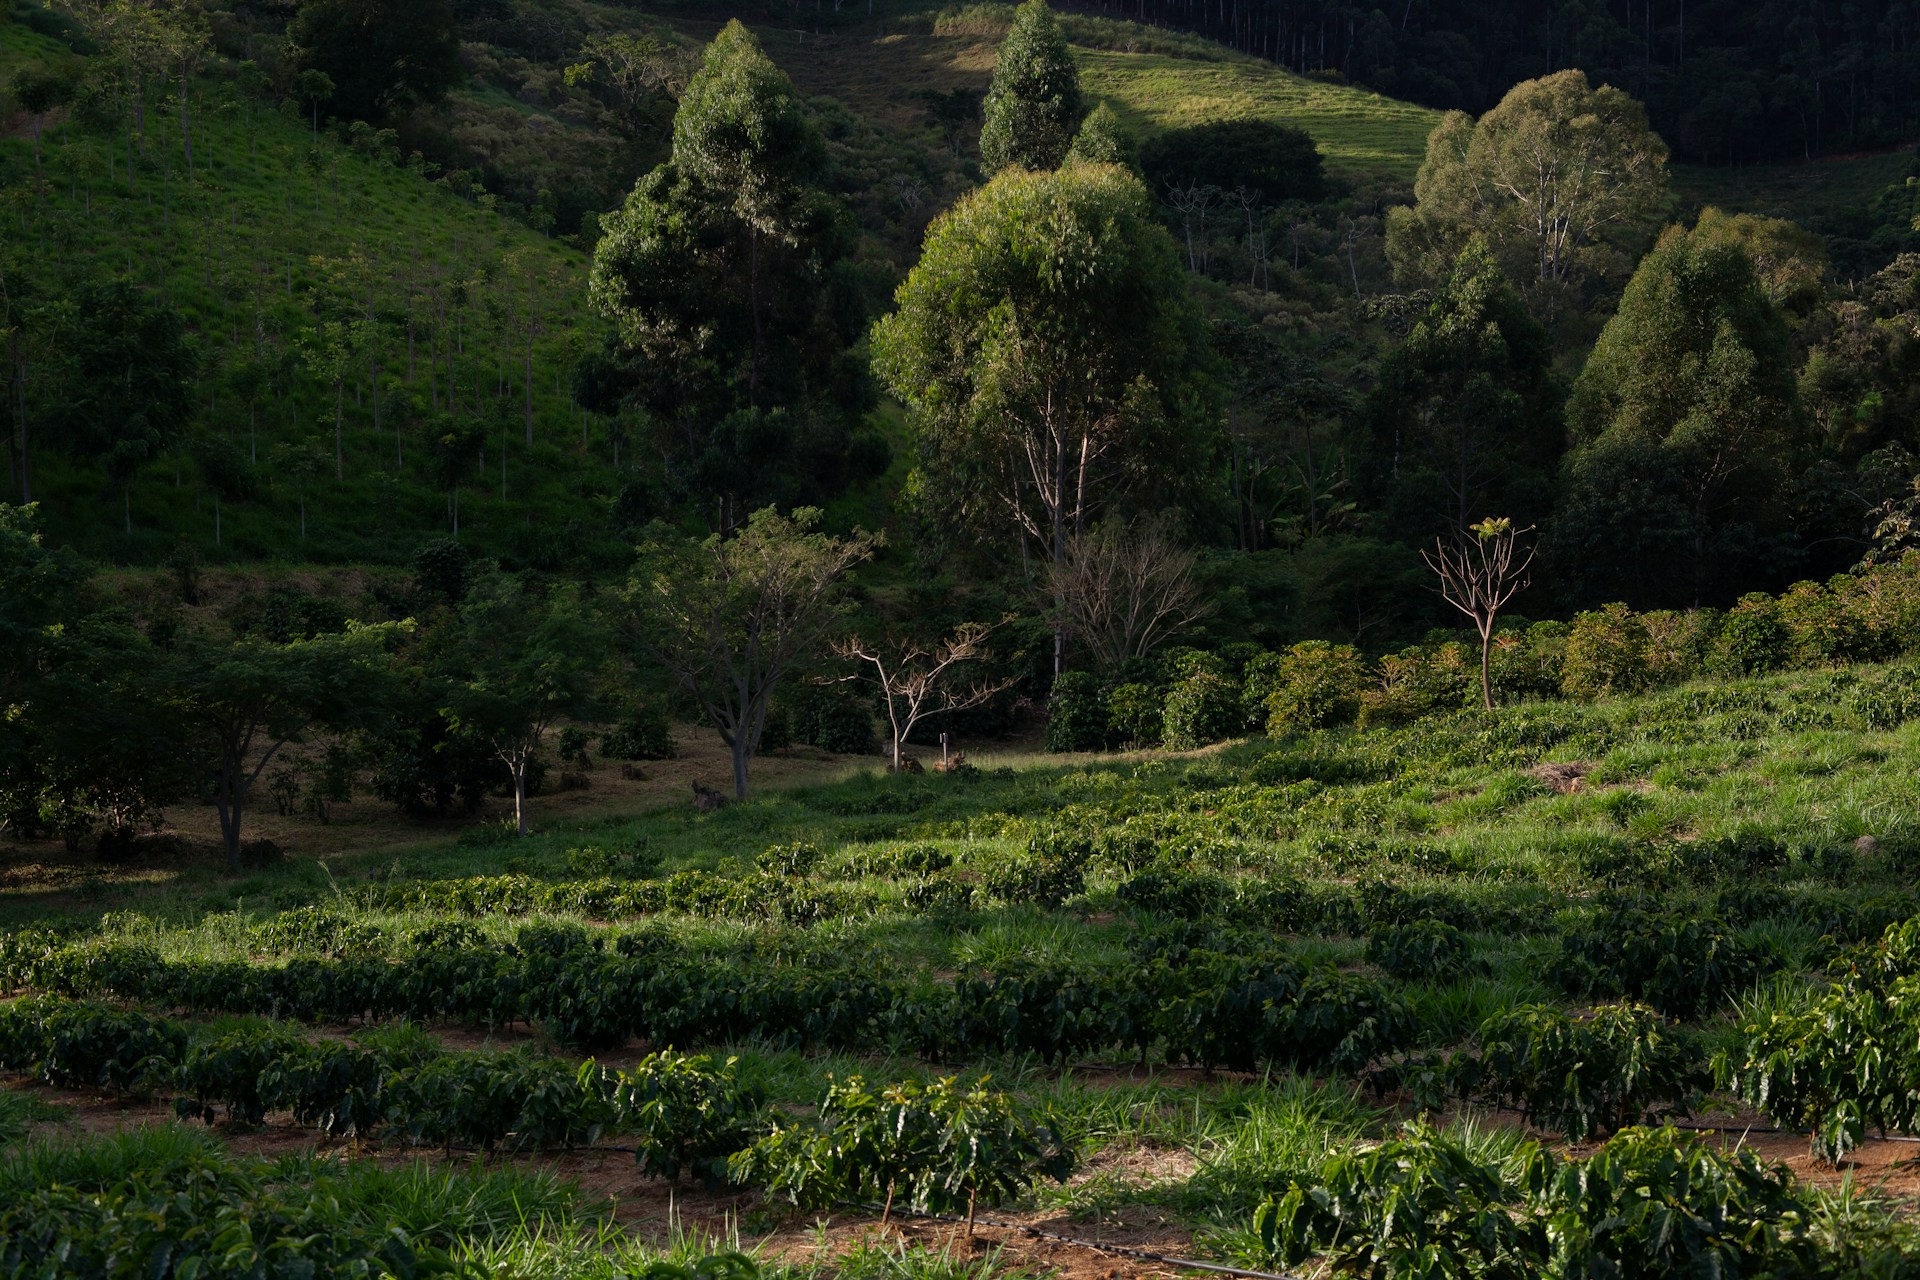 Irrecoverable carbon in the mountains: embracing the opportunity of agroforestry